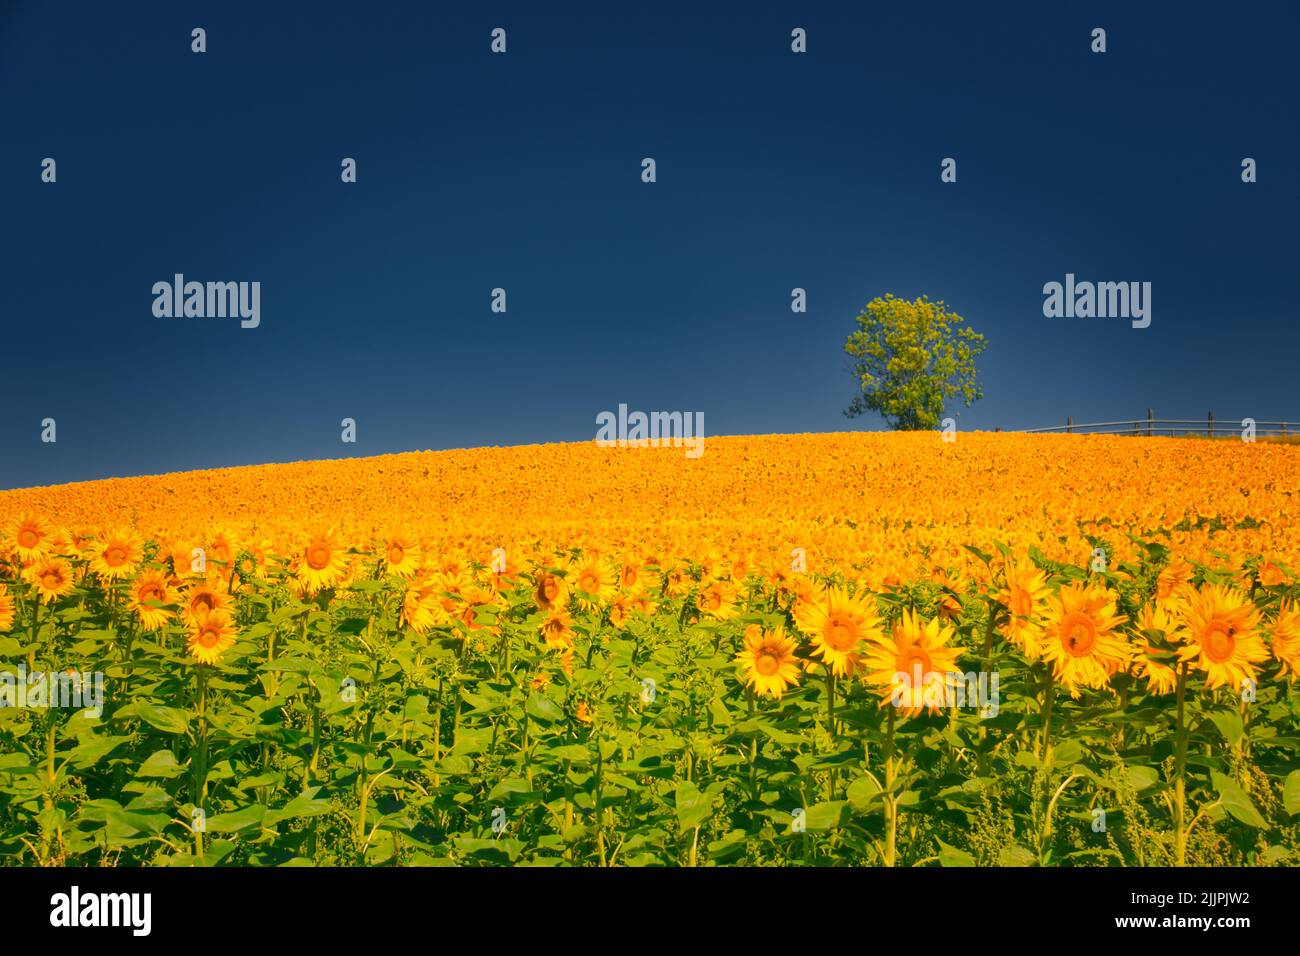 Lone tree and Sunflowers growing in a field, Oberrohrdorf, Aargau, Switzerland Stock Photo